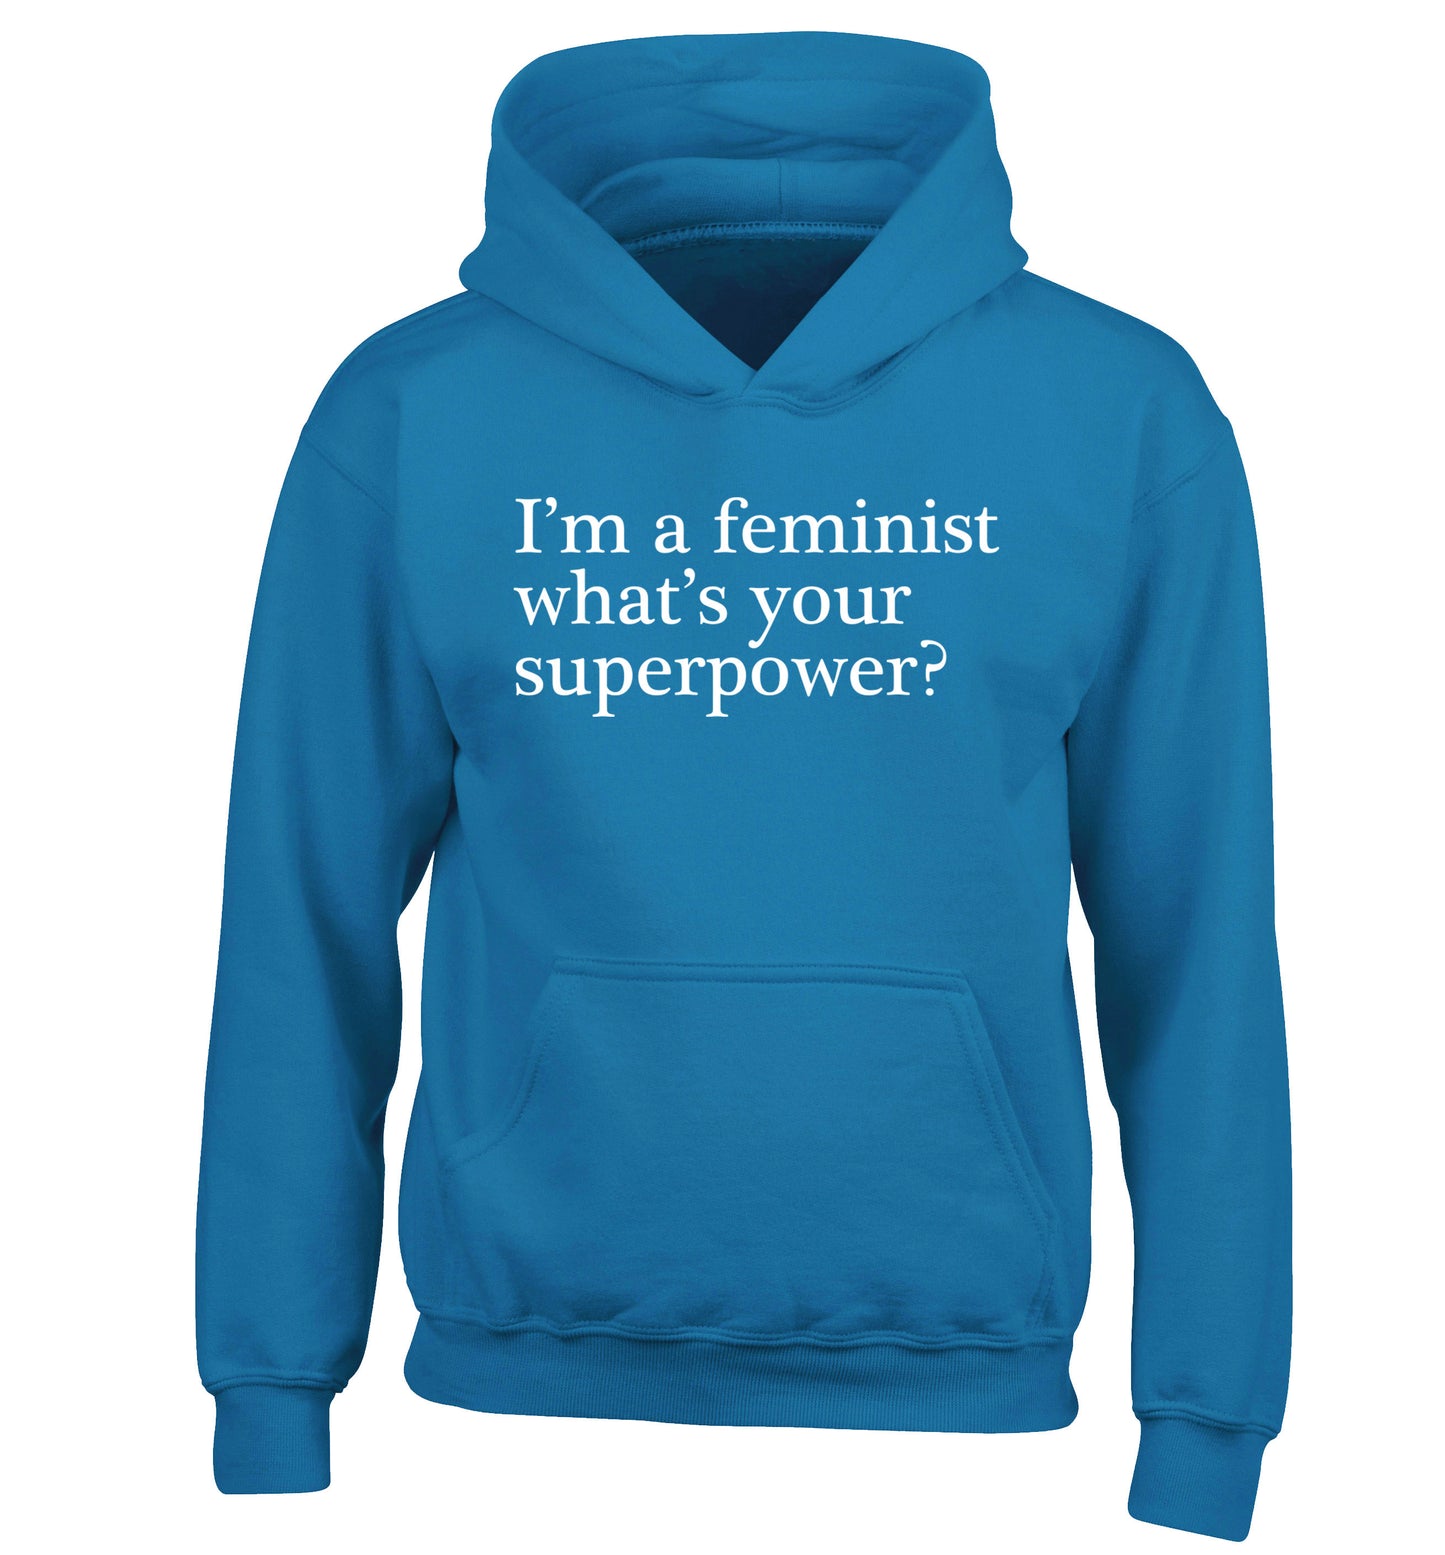 I'm a feminist what's your superpower? children's blue hoodie 12-14 Years